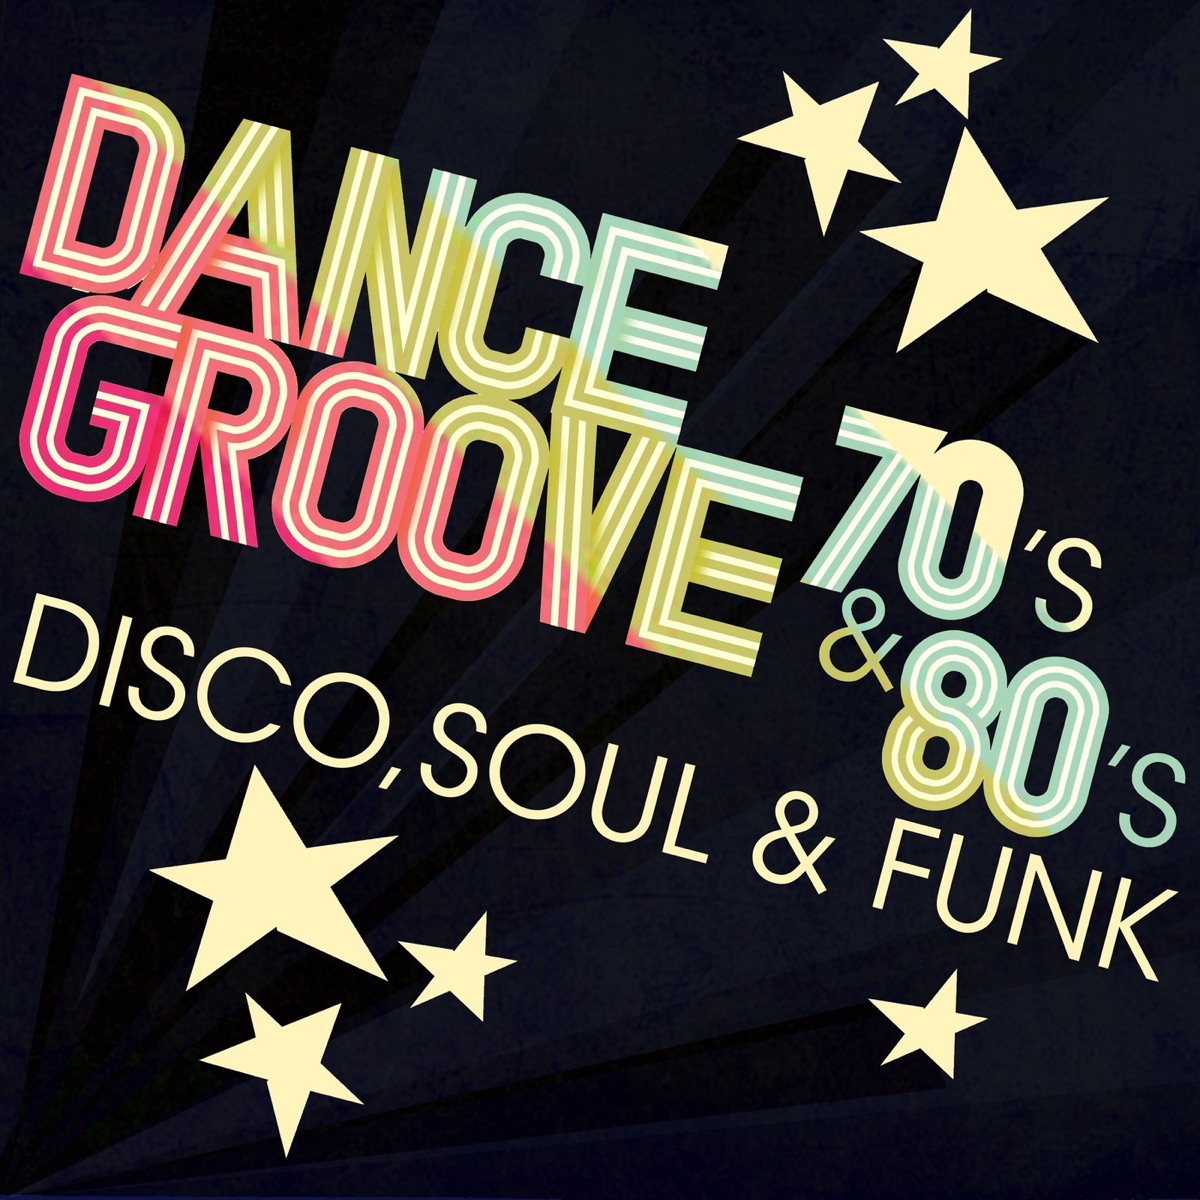 Dance Groove 70's & 80's: Disco, Soul & Funk by Various Artists on Apple  Music